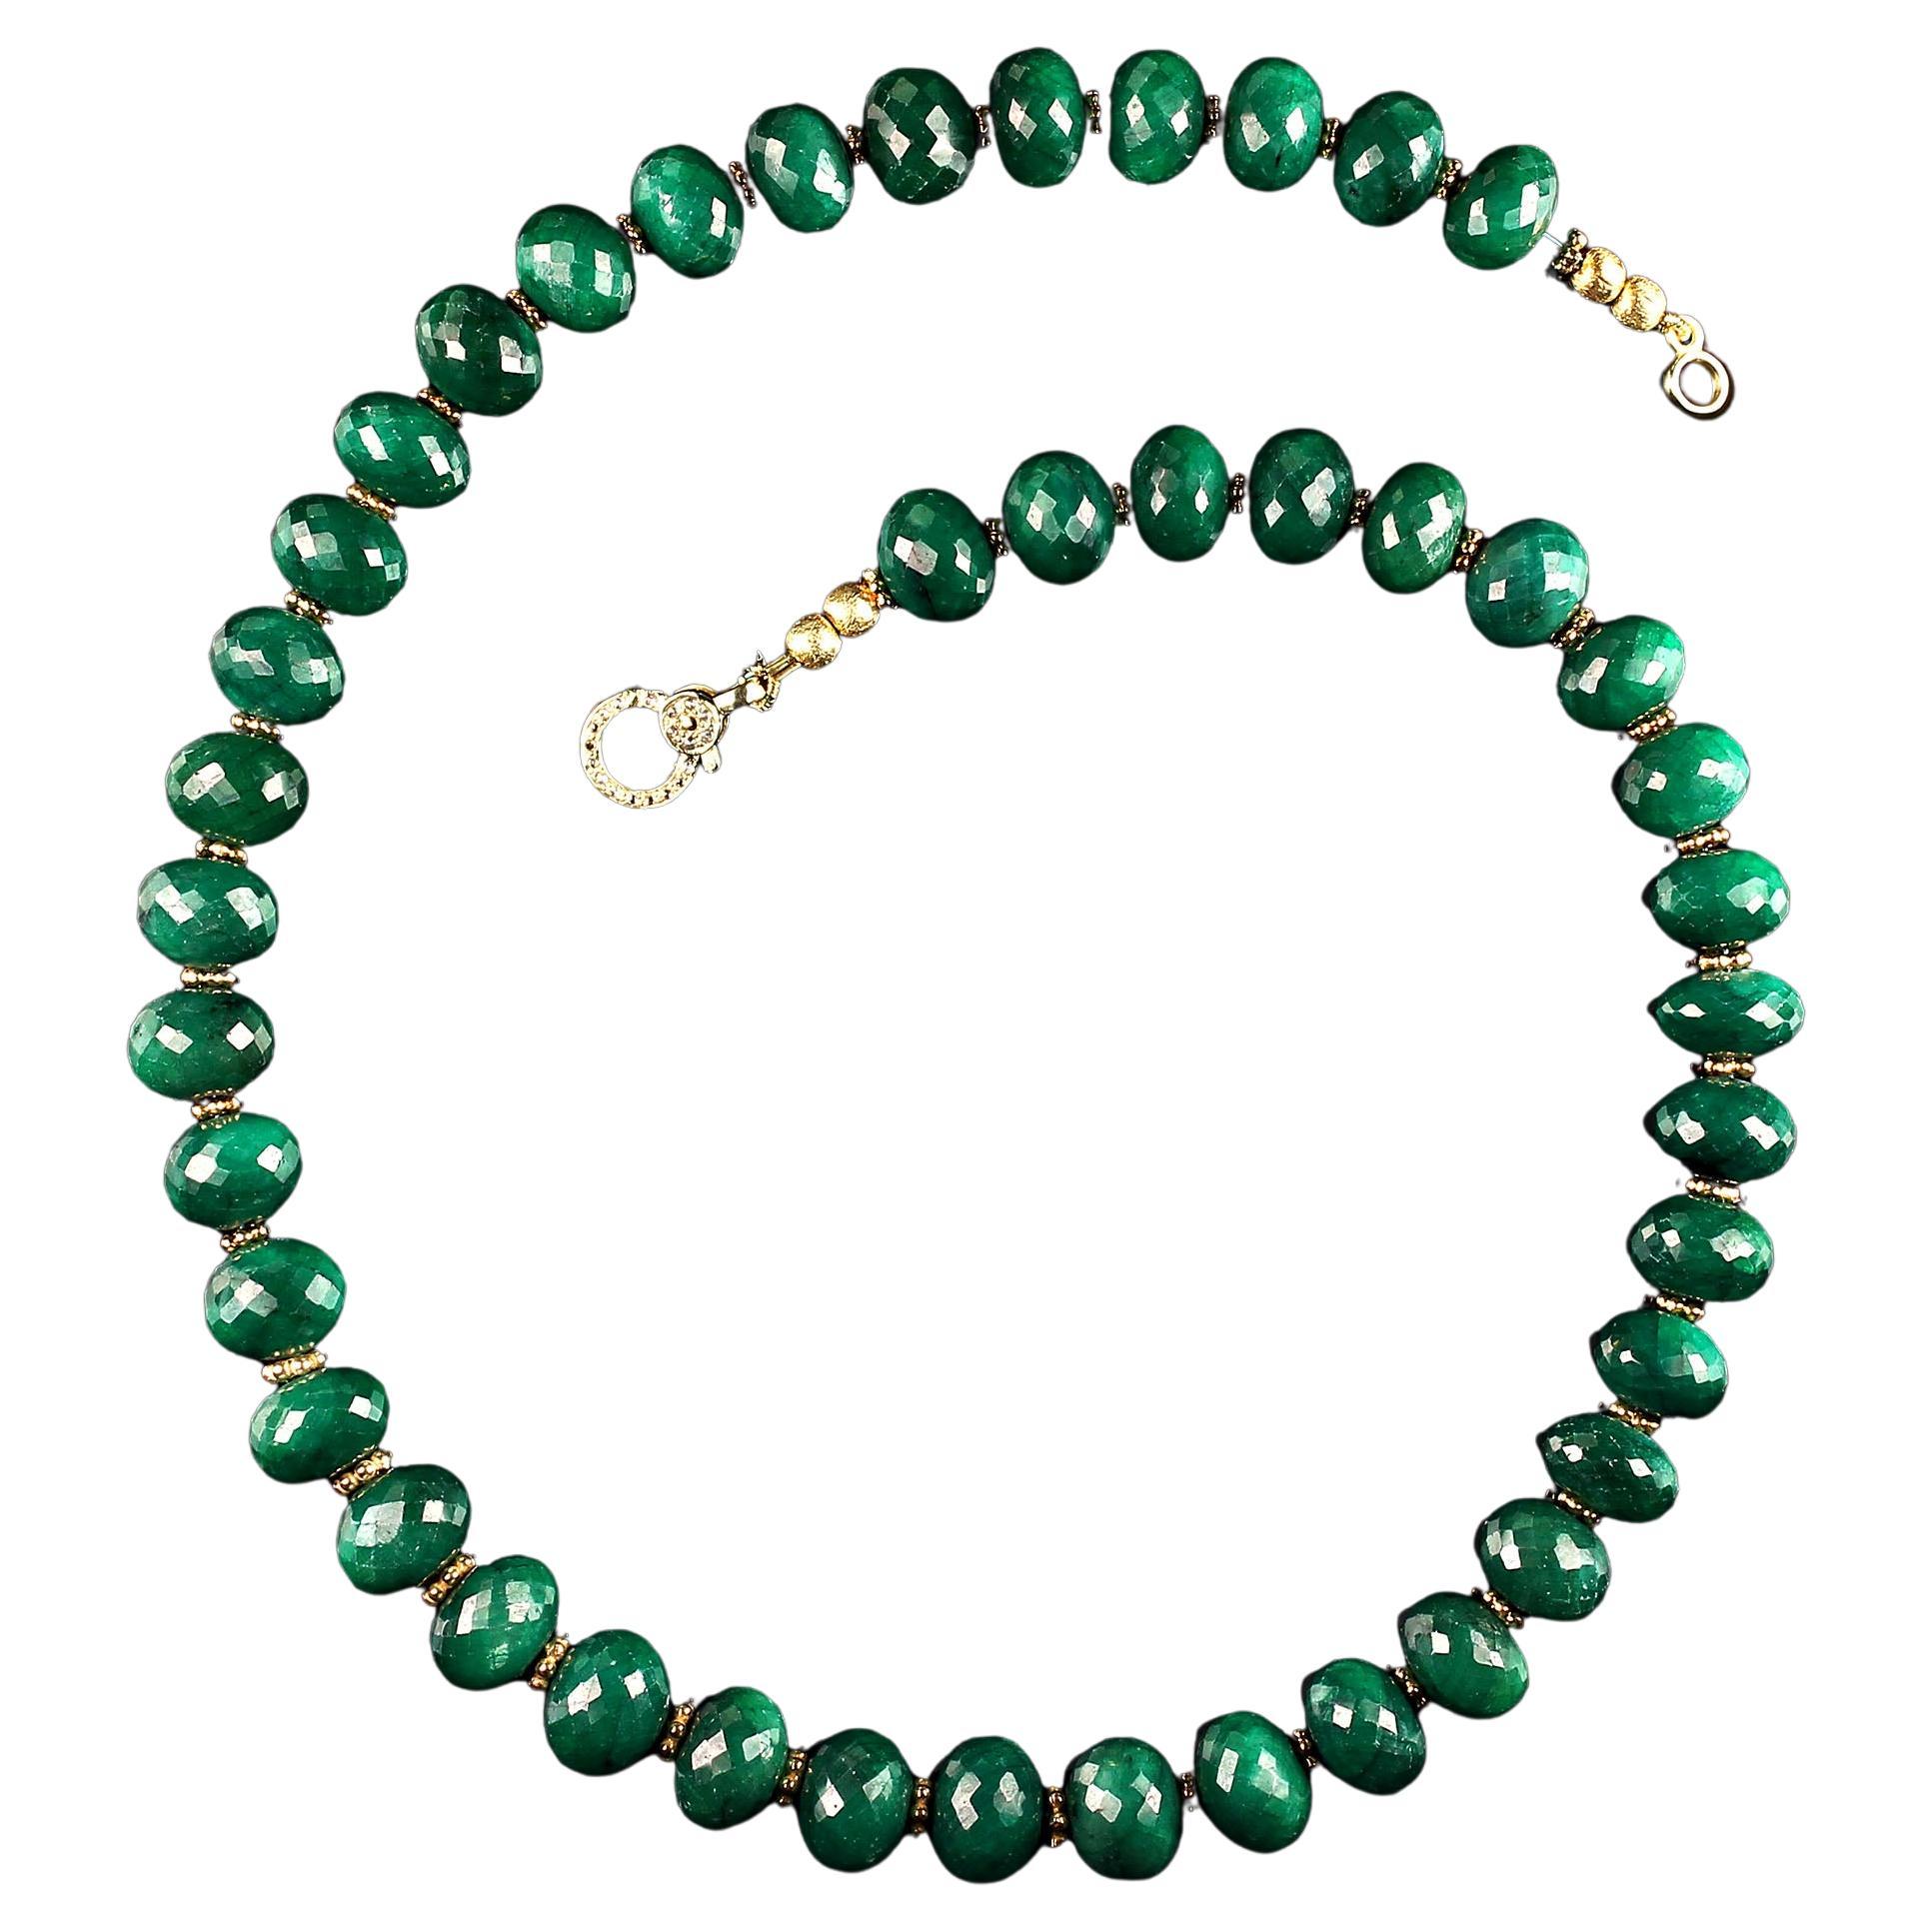 AJD Simply Elegant Emerald necklace with goldy accents 18 Inch In New Condition For Sale In Raleigh, NC